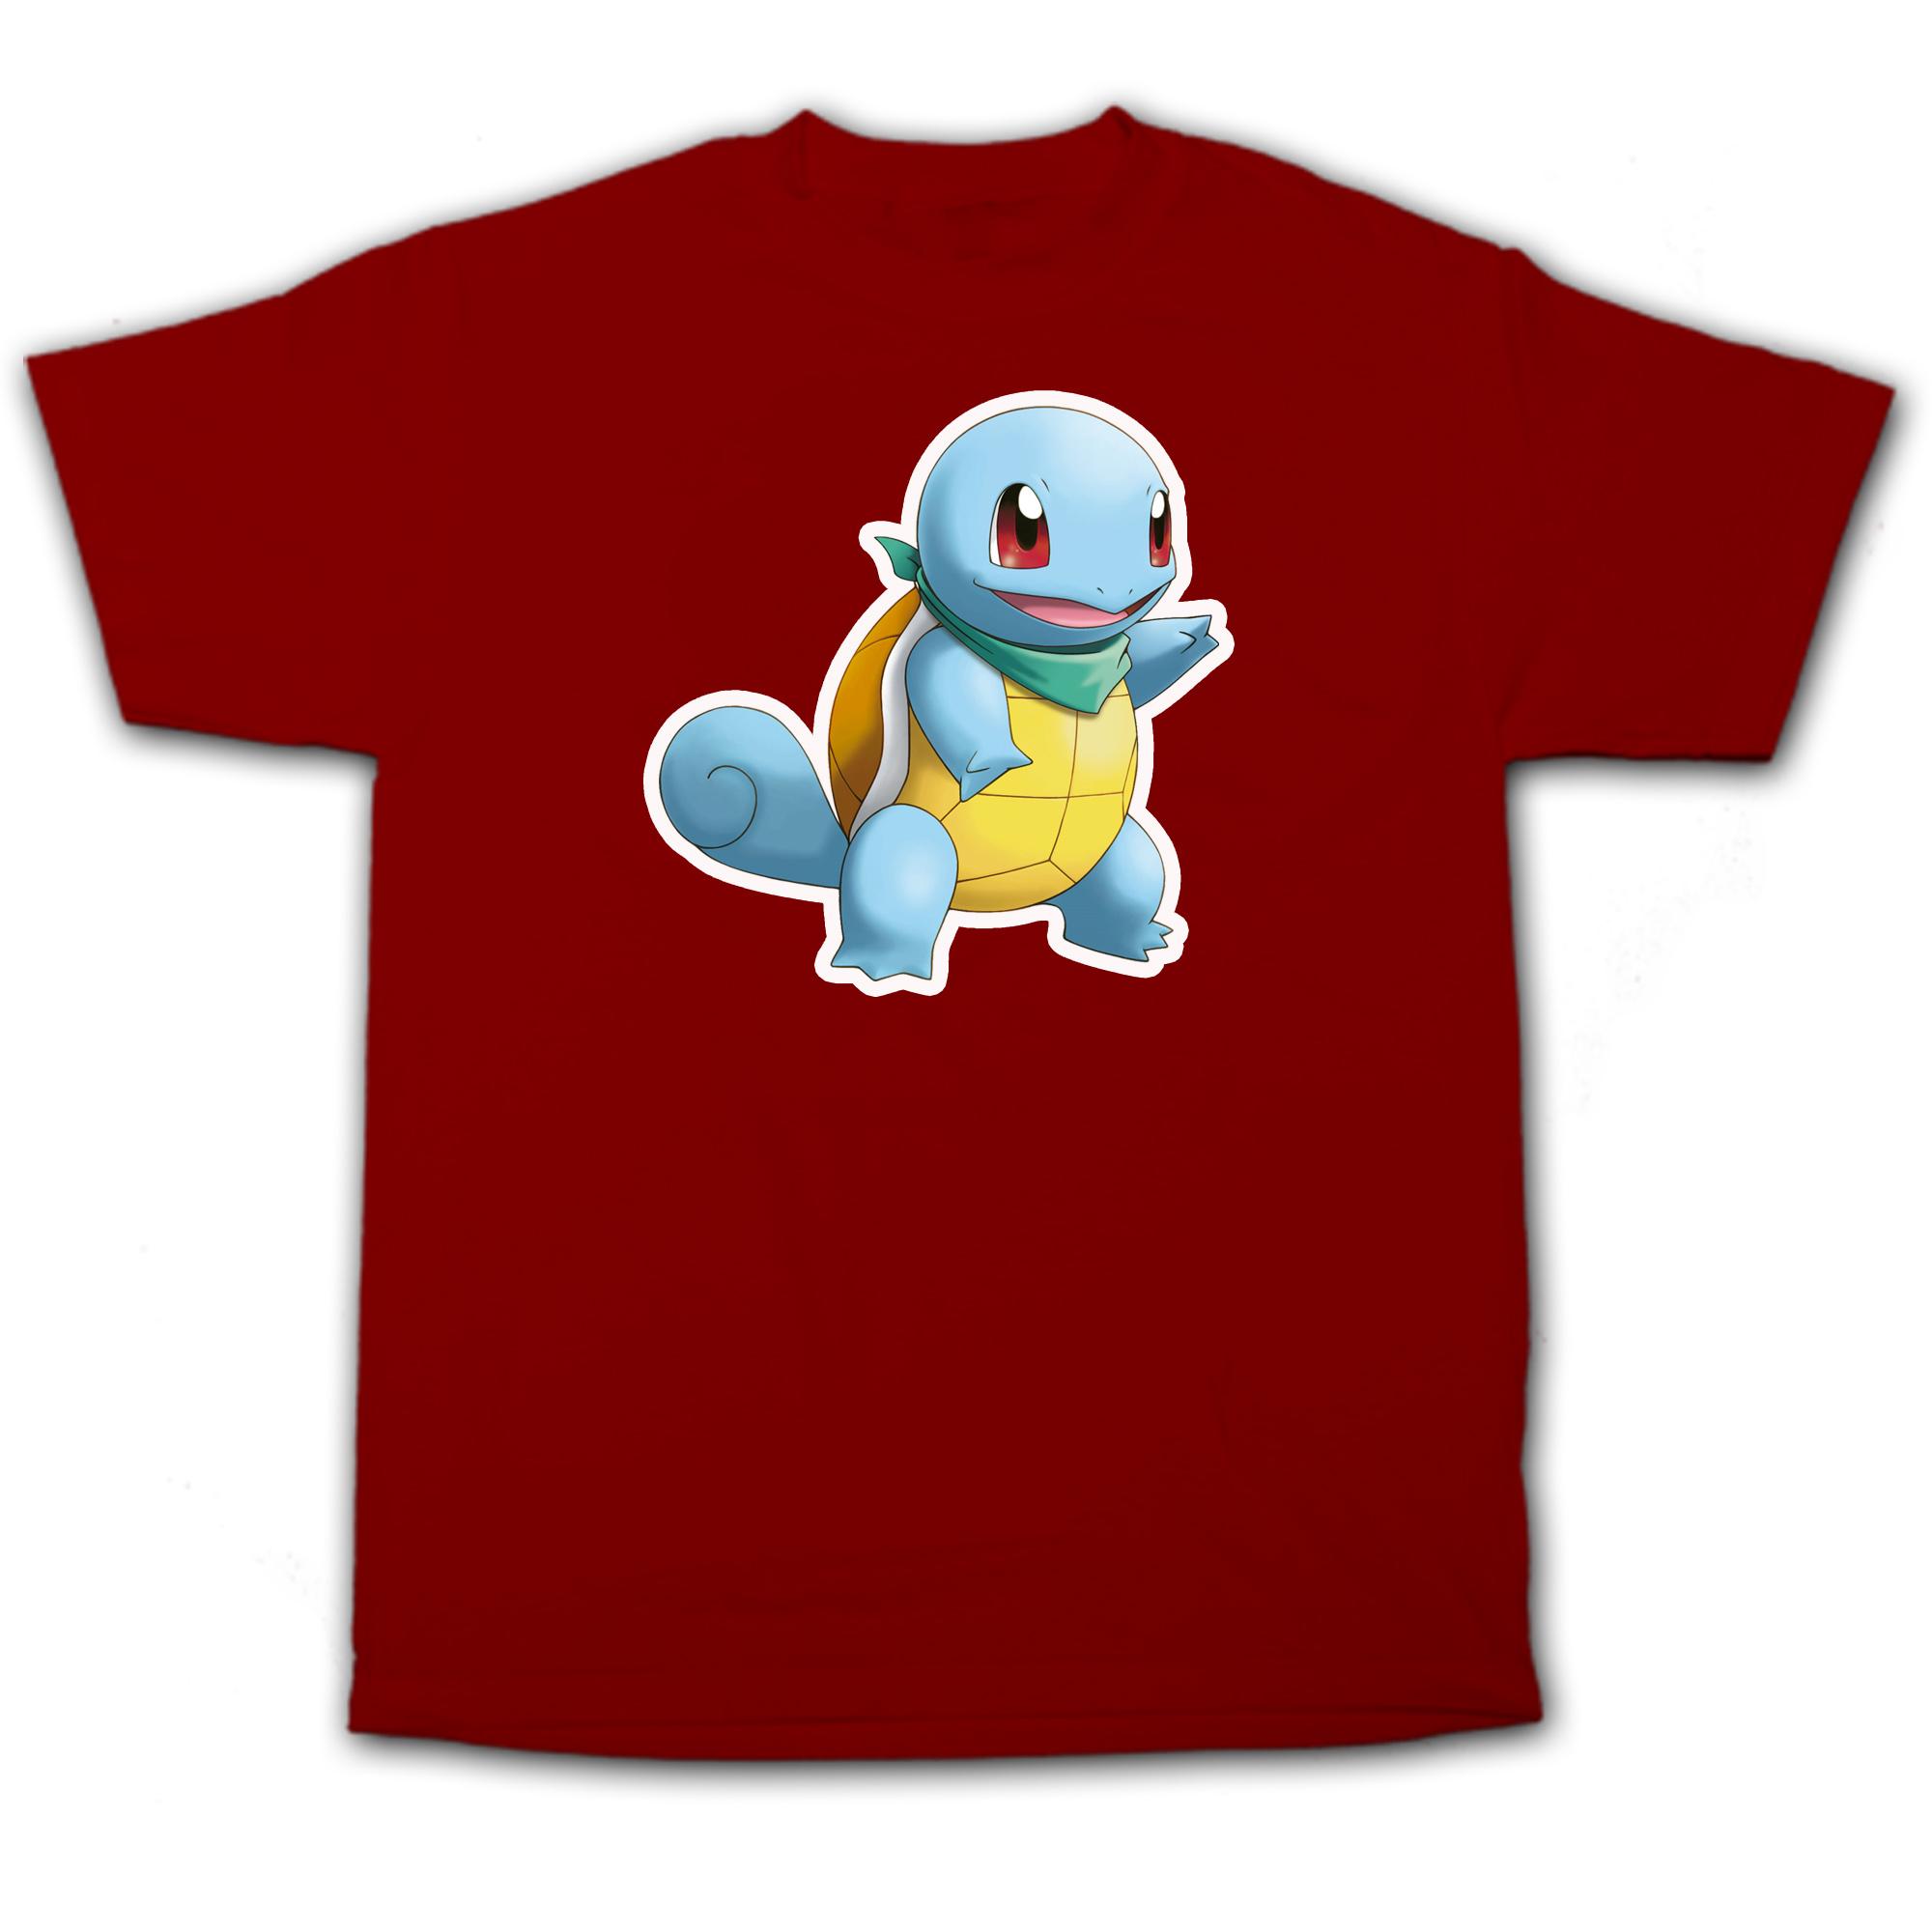 SQUIRTLE CITY Men's Funny T-Shirt Pokemon Gaming